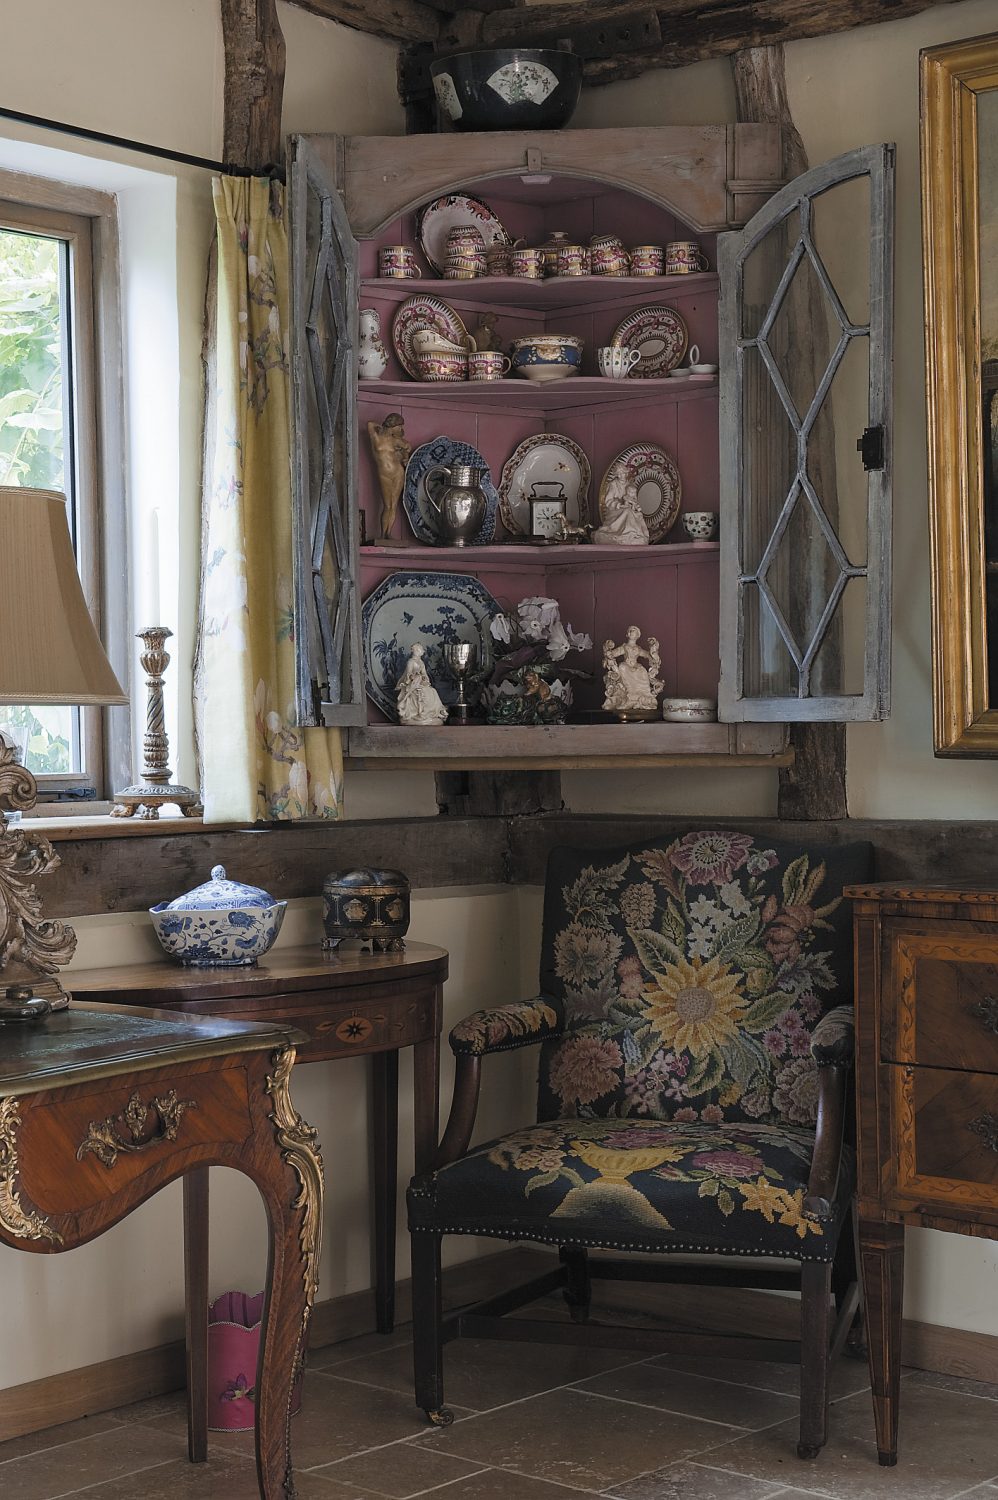 the barn is furnished largely with beautiful possessions much loved through the centuries